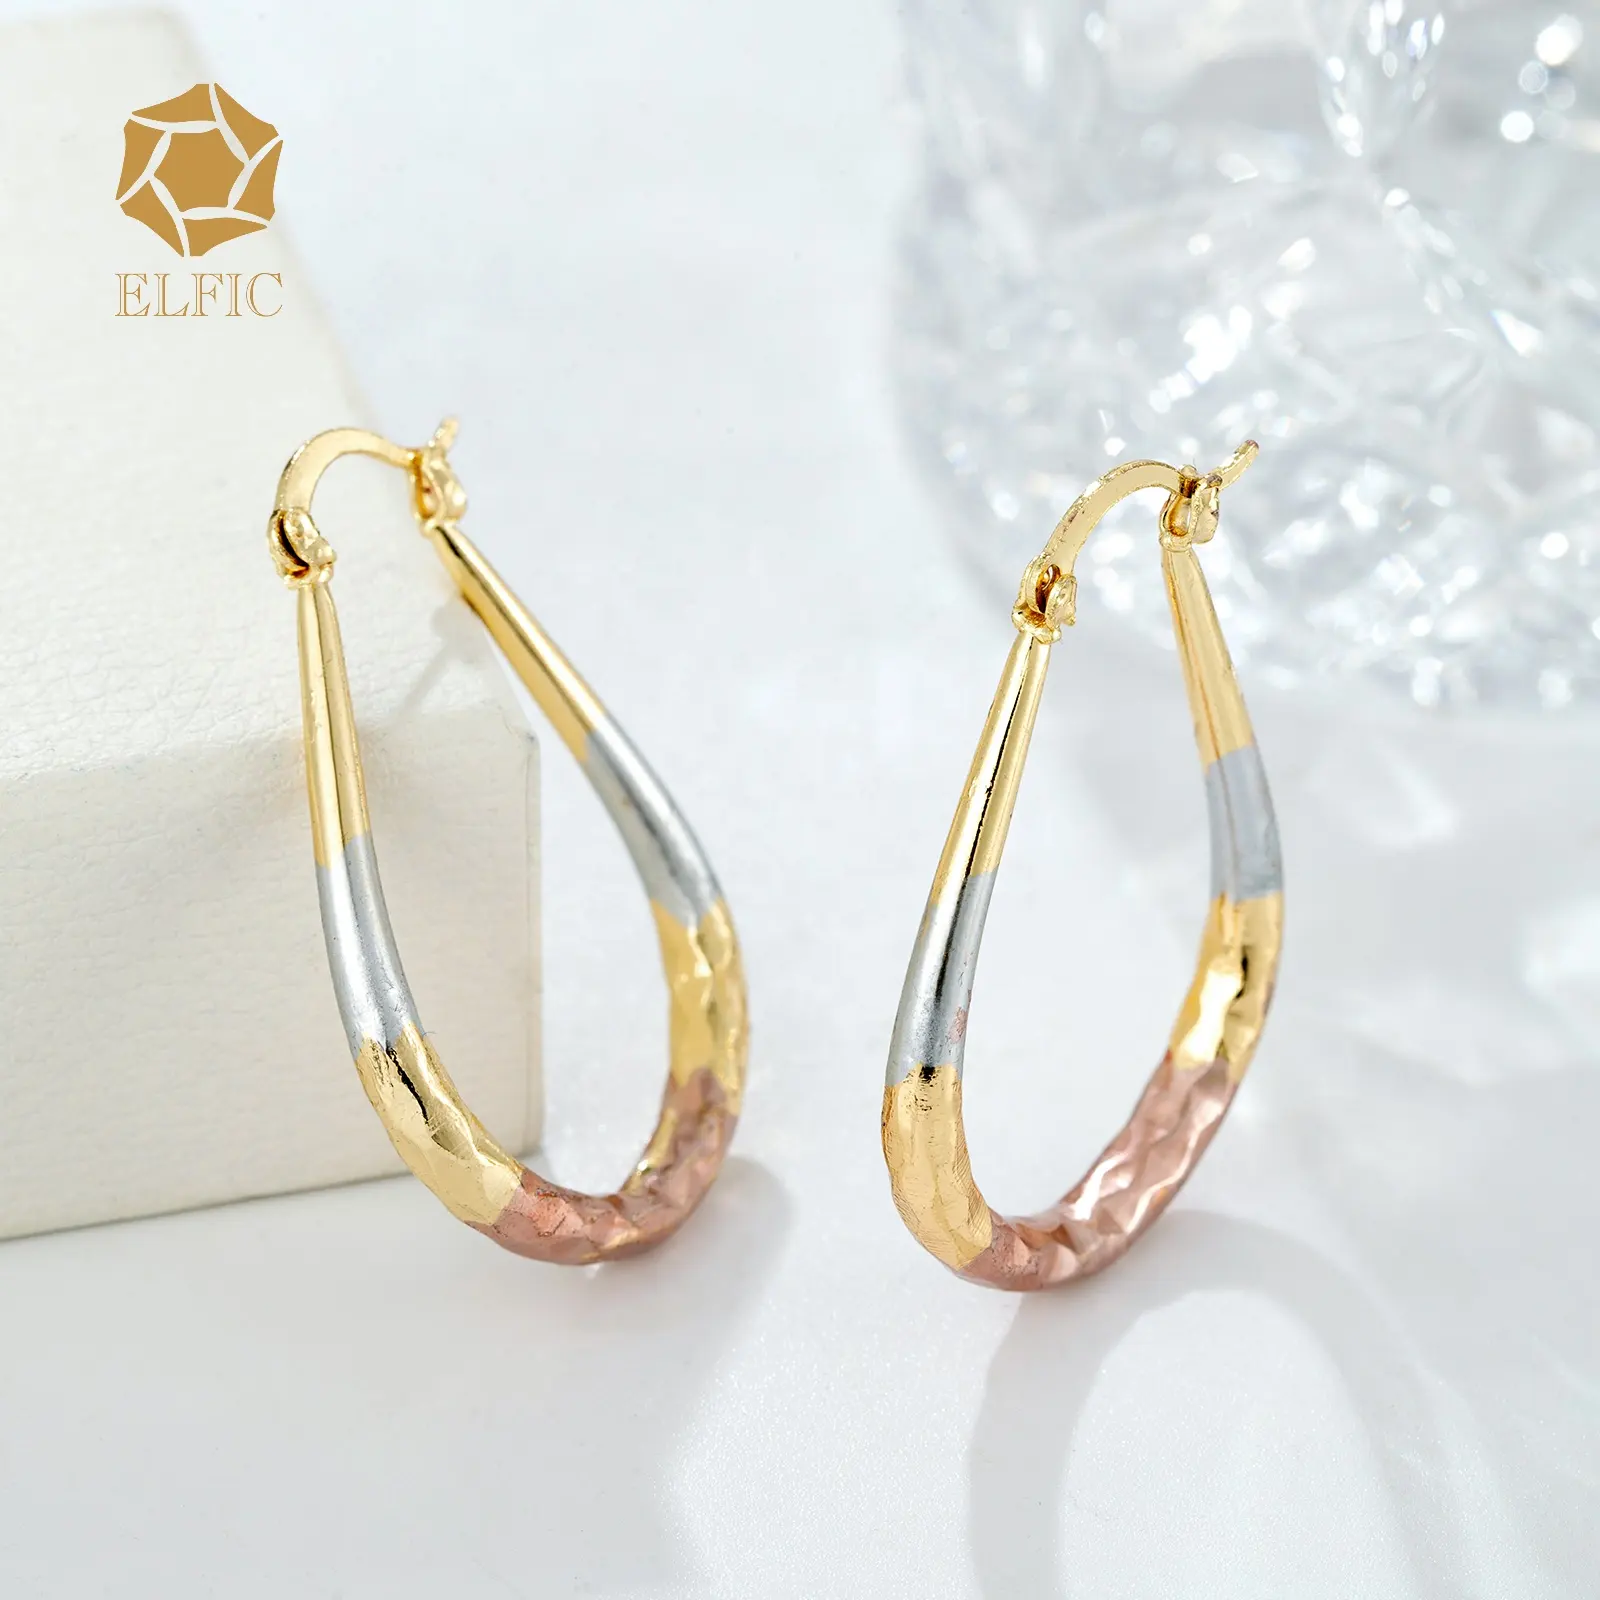 50mm 60mm Hoop Earrings Plated Jewelry Gold For Women Zircon Copper Round Tortoise Shell And Gold Hoop Earrings 12 Pairs 30mm